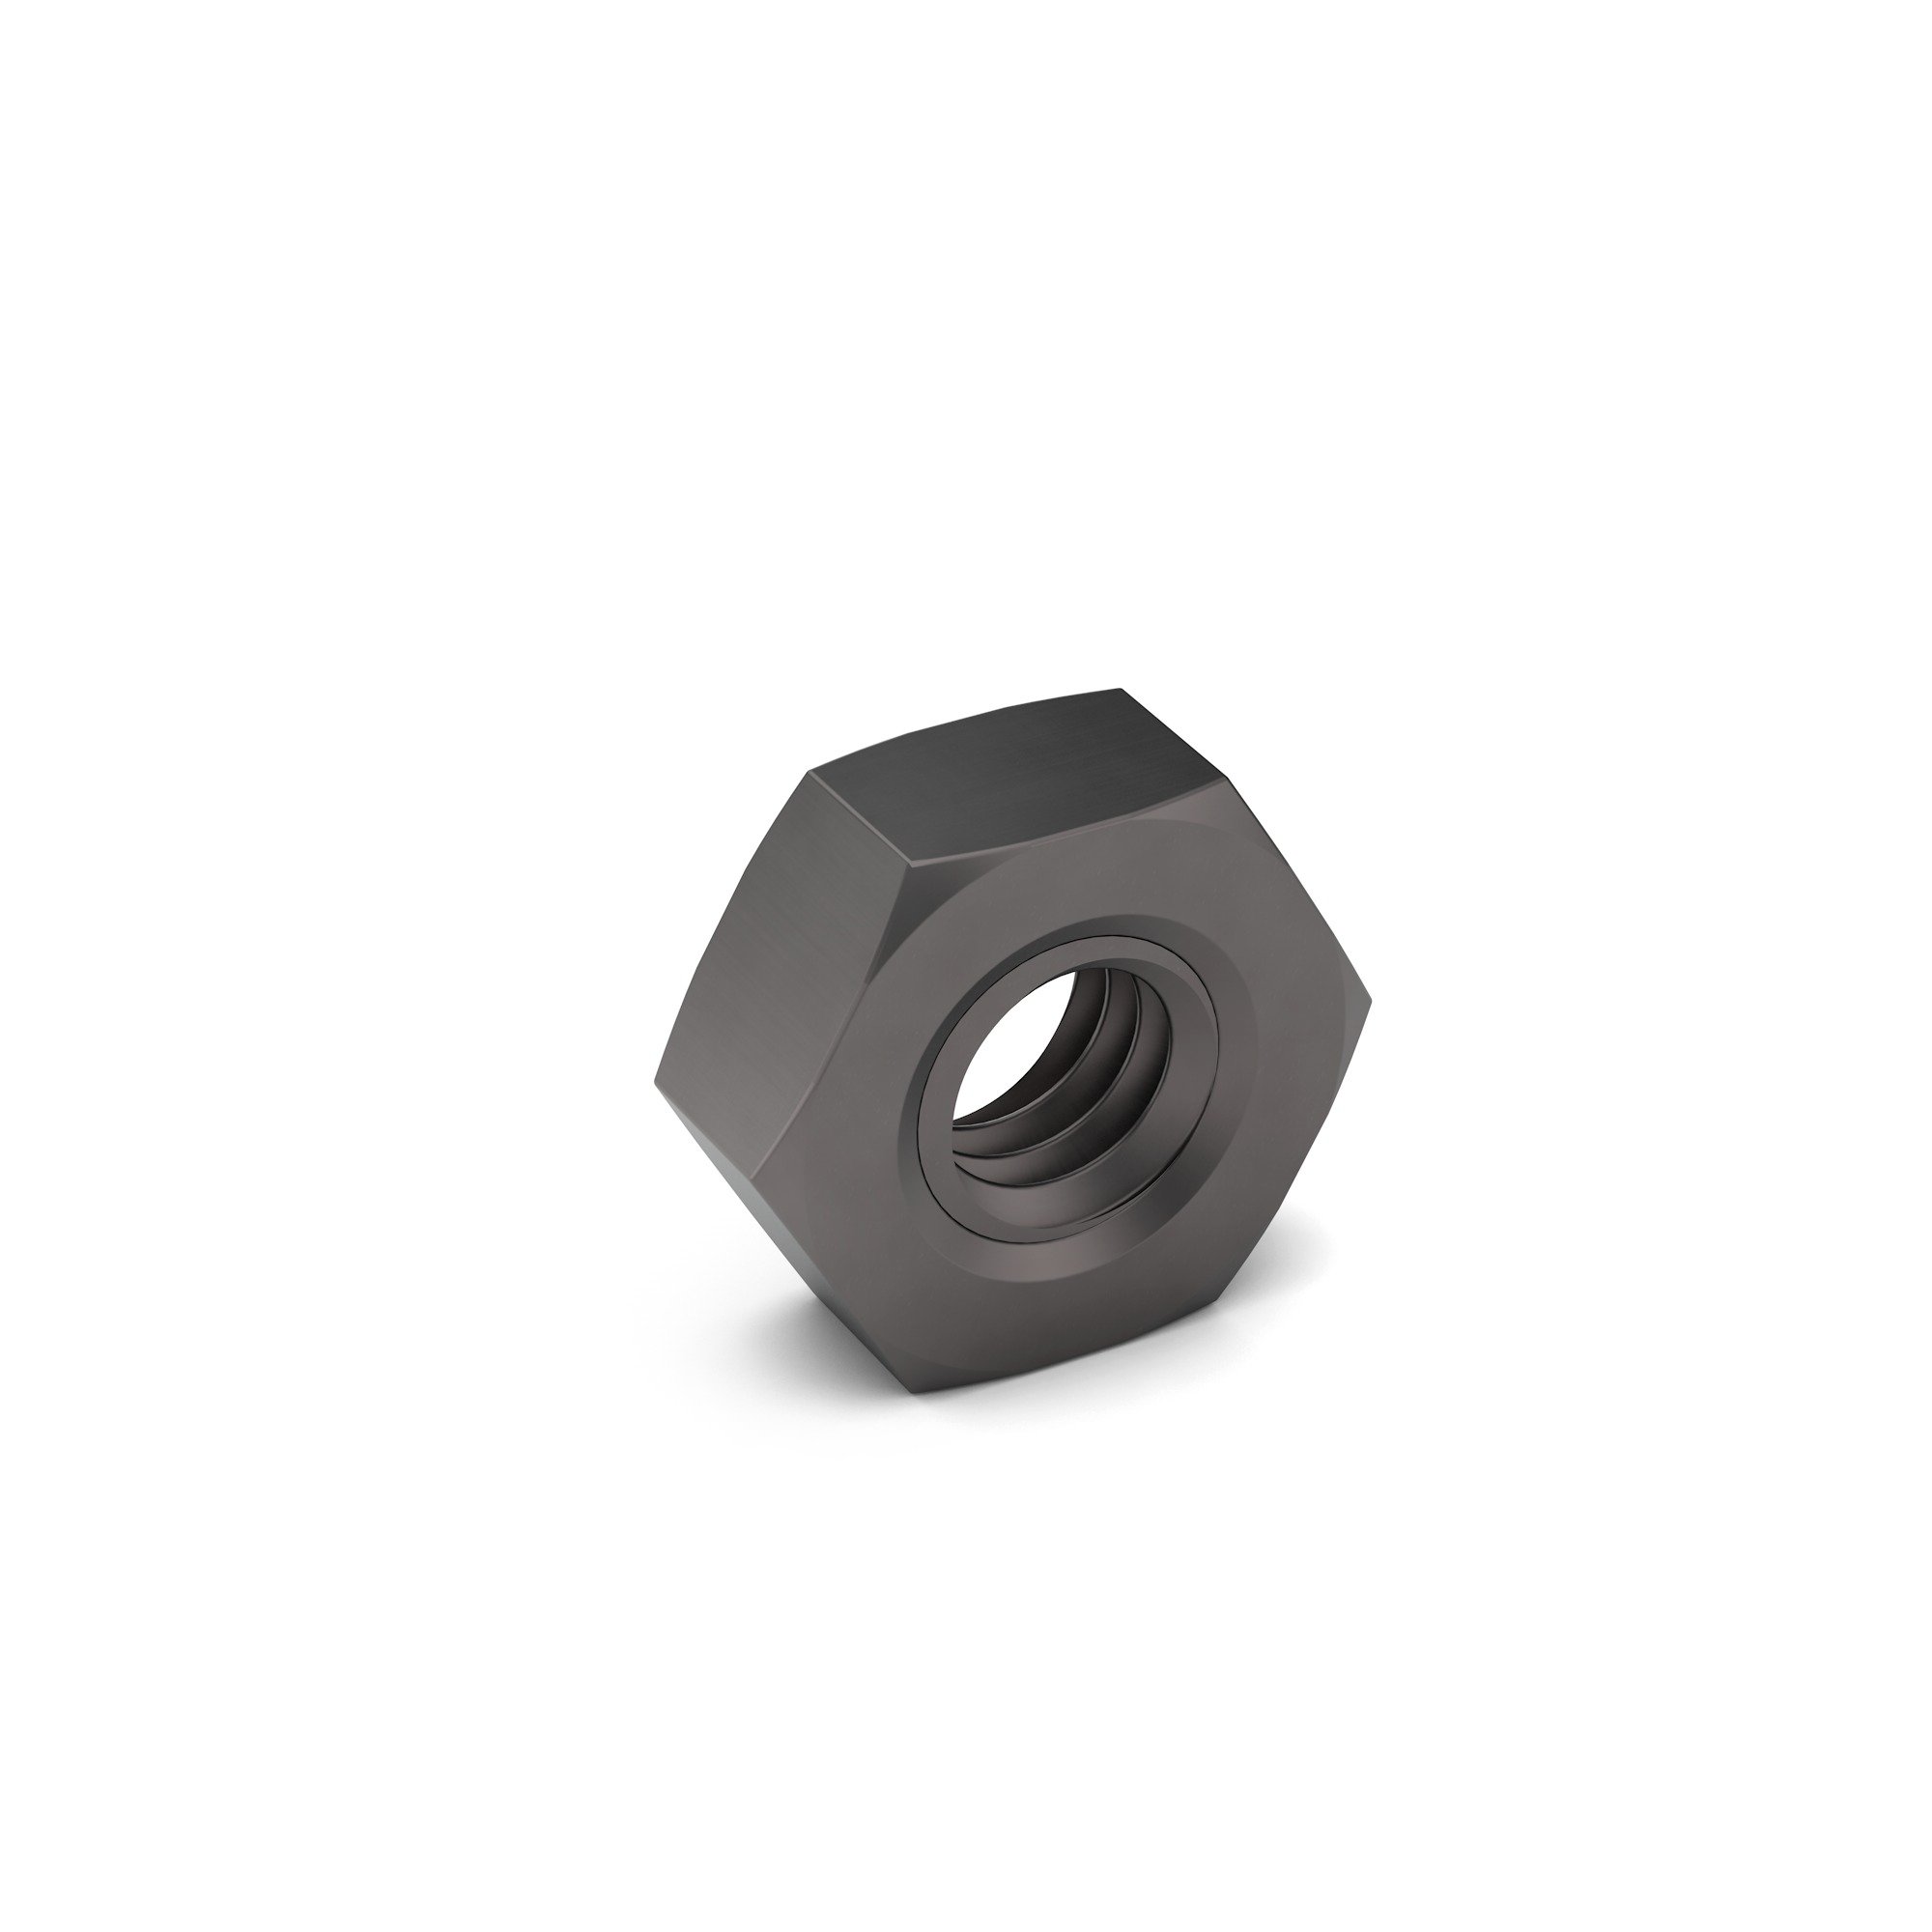 1/2-20 18/8 (A2) SS Hex Jam Nut COATED WITH DRI-LOC 2045 AS PER DWG#6048213-XXX